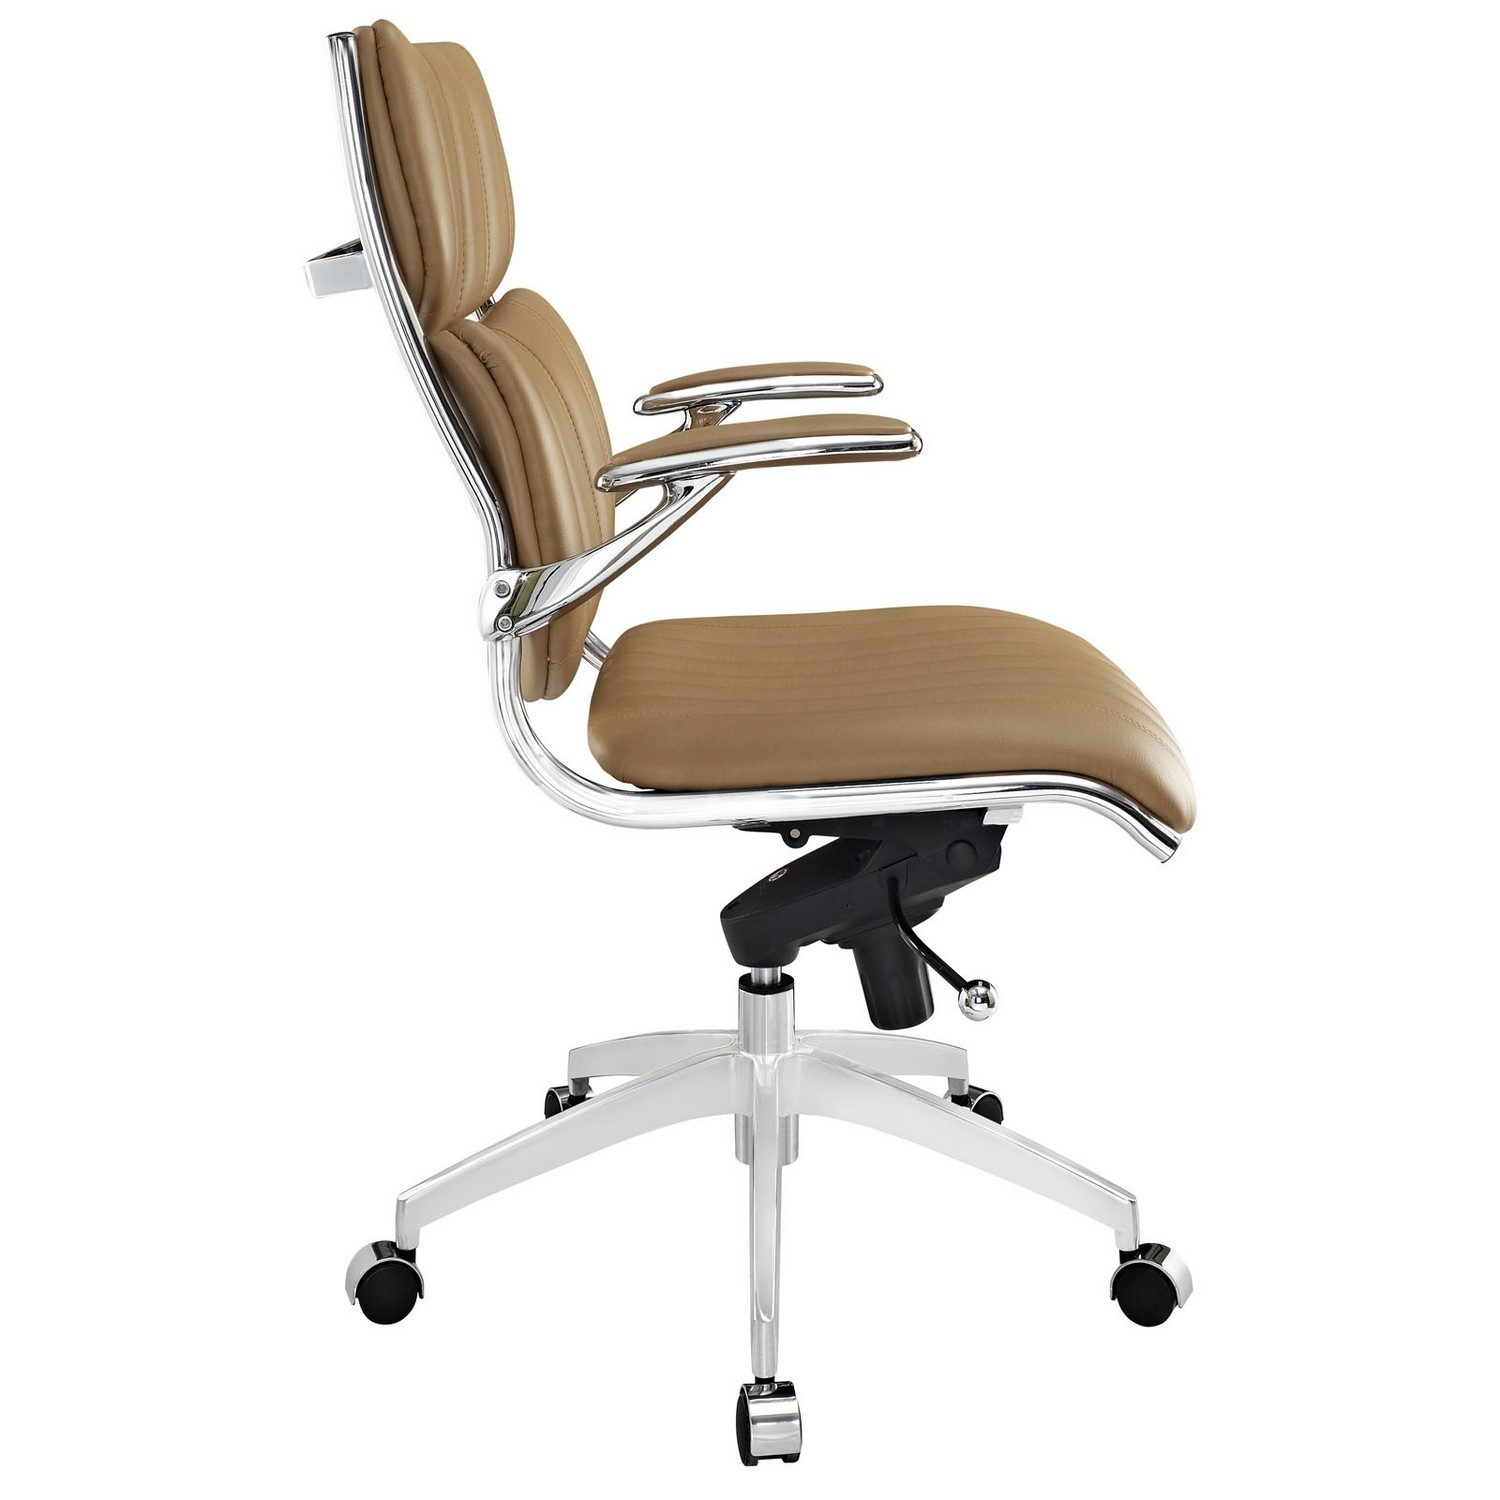 Modway Escape Mid Back Office Chair - Tan